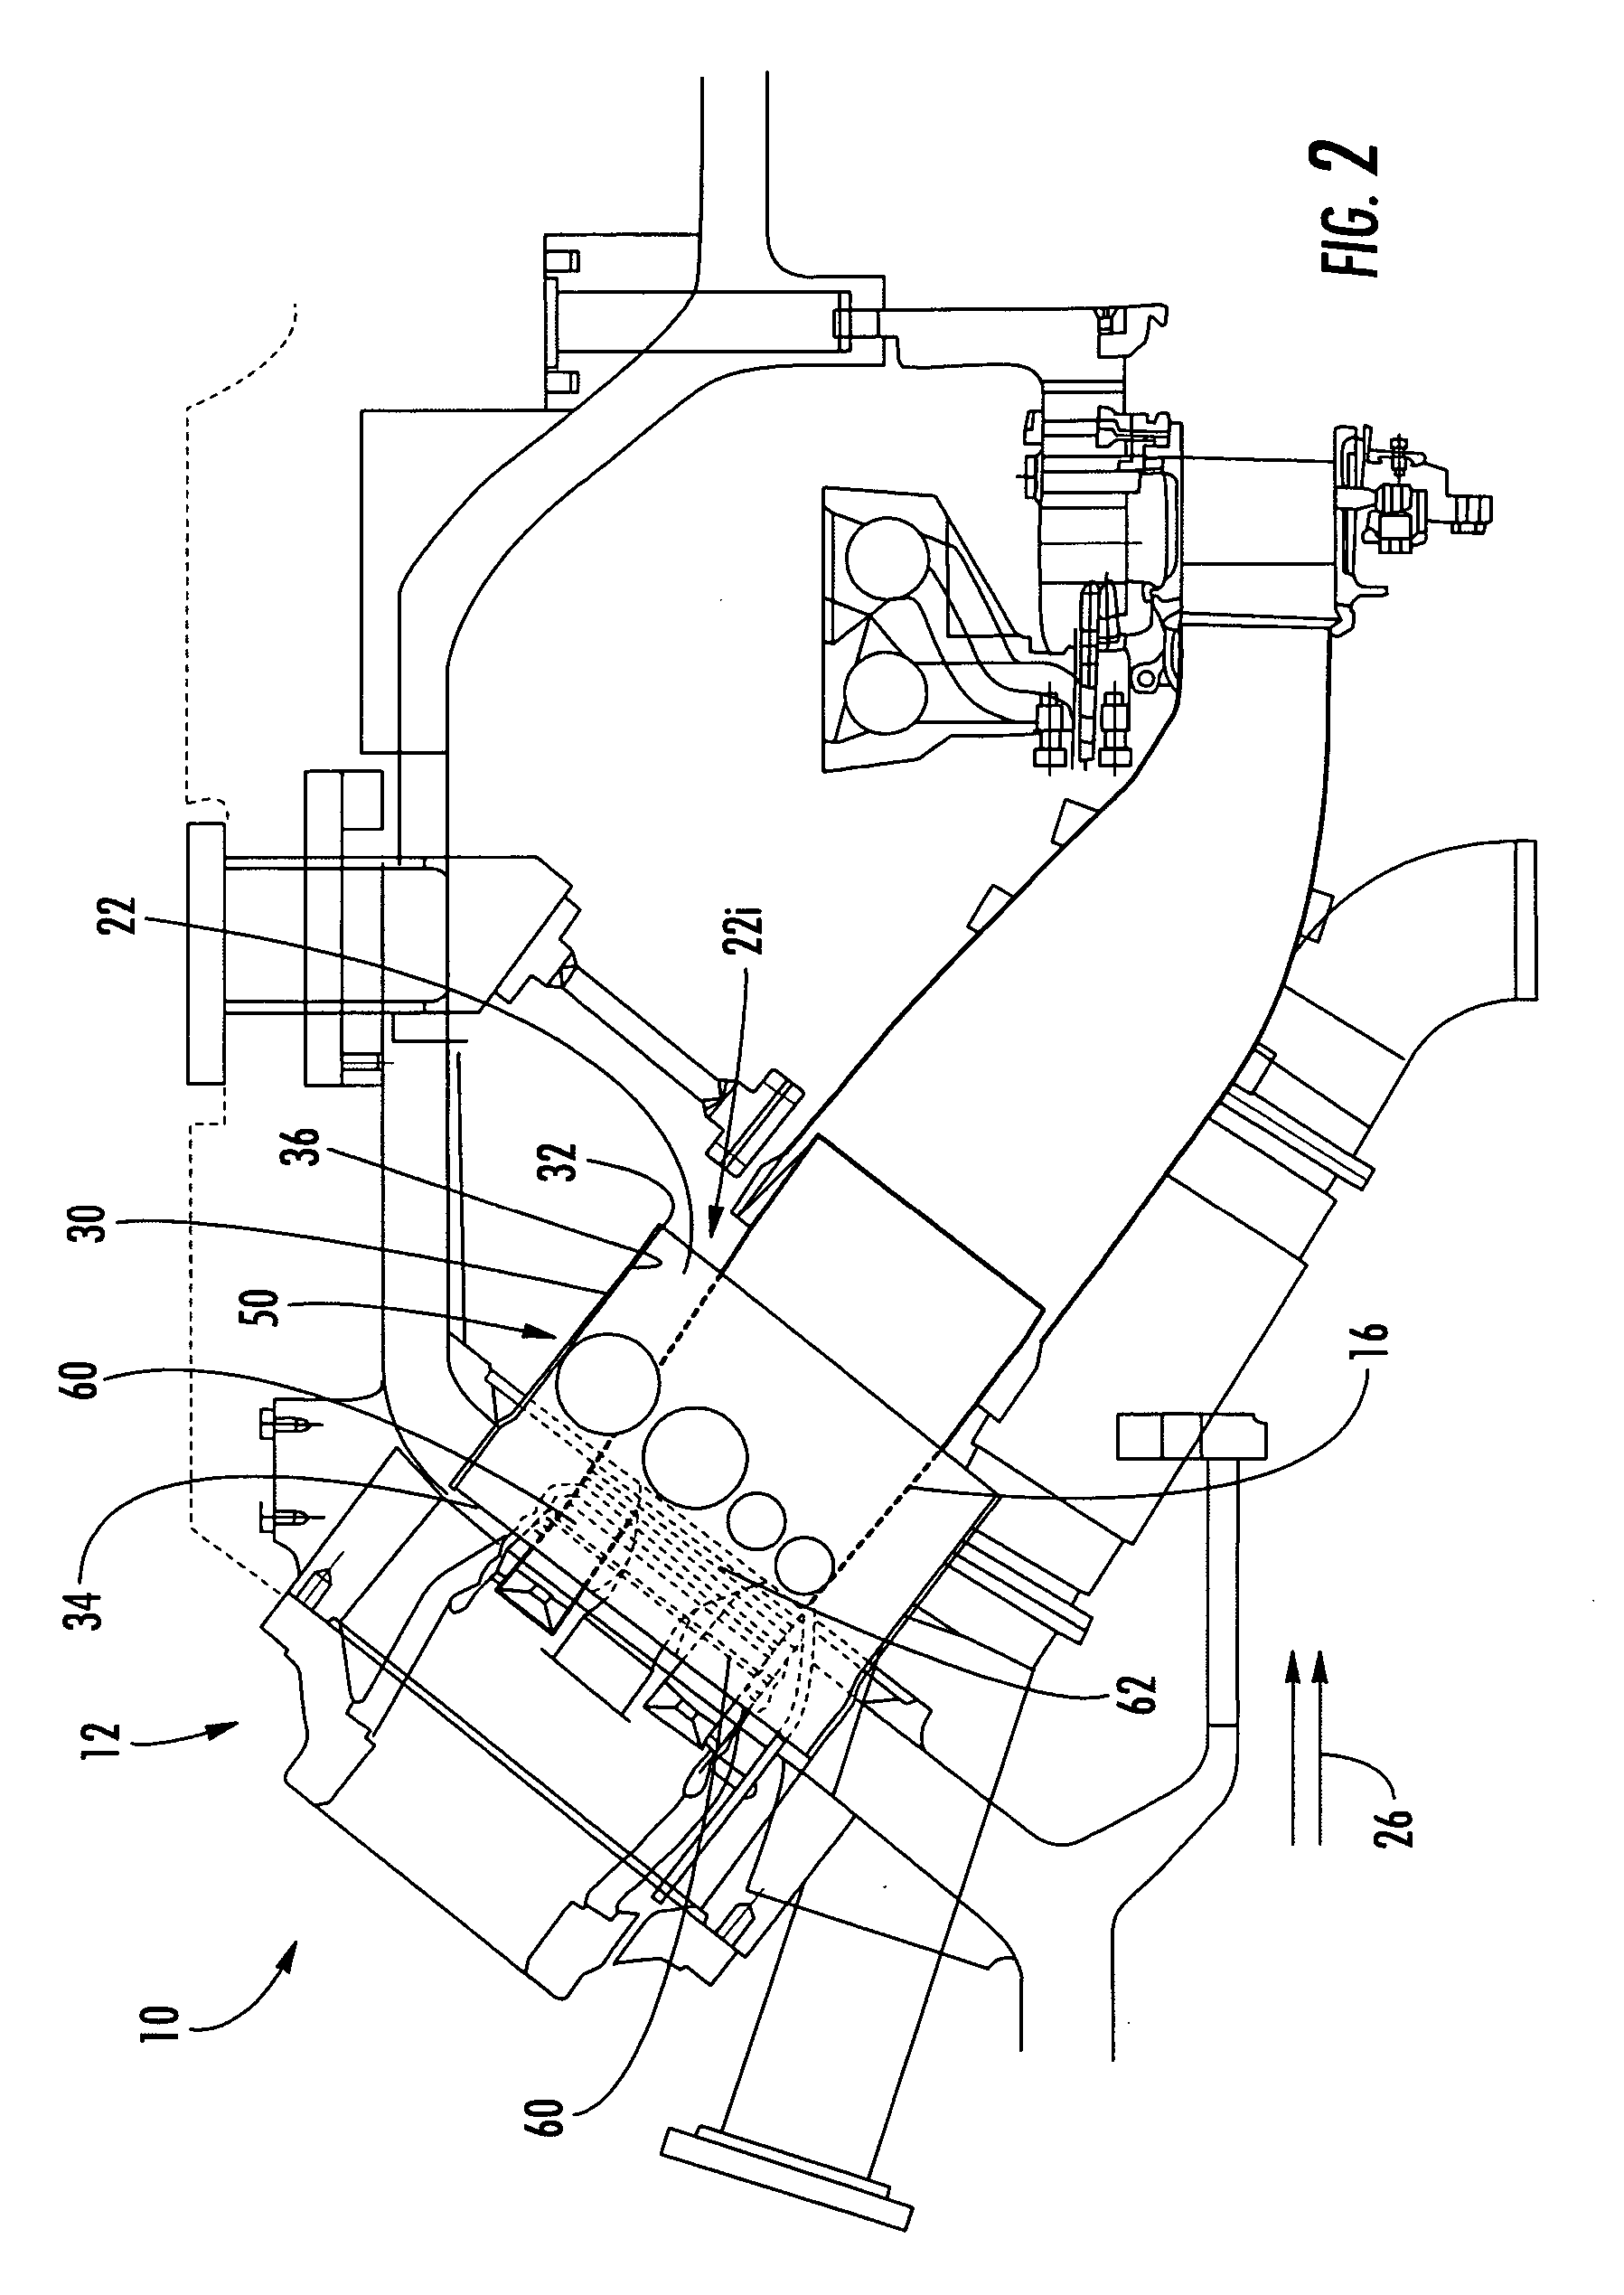 Combustor flow sleeve with optimized cooling and airflow distribution